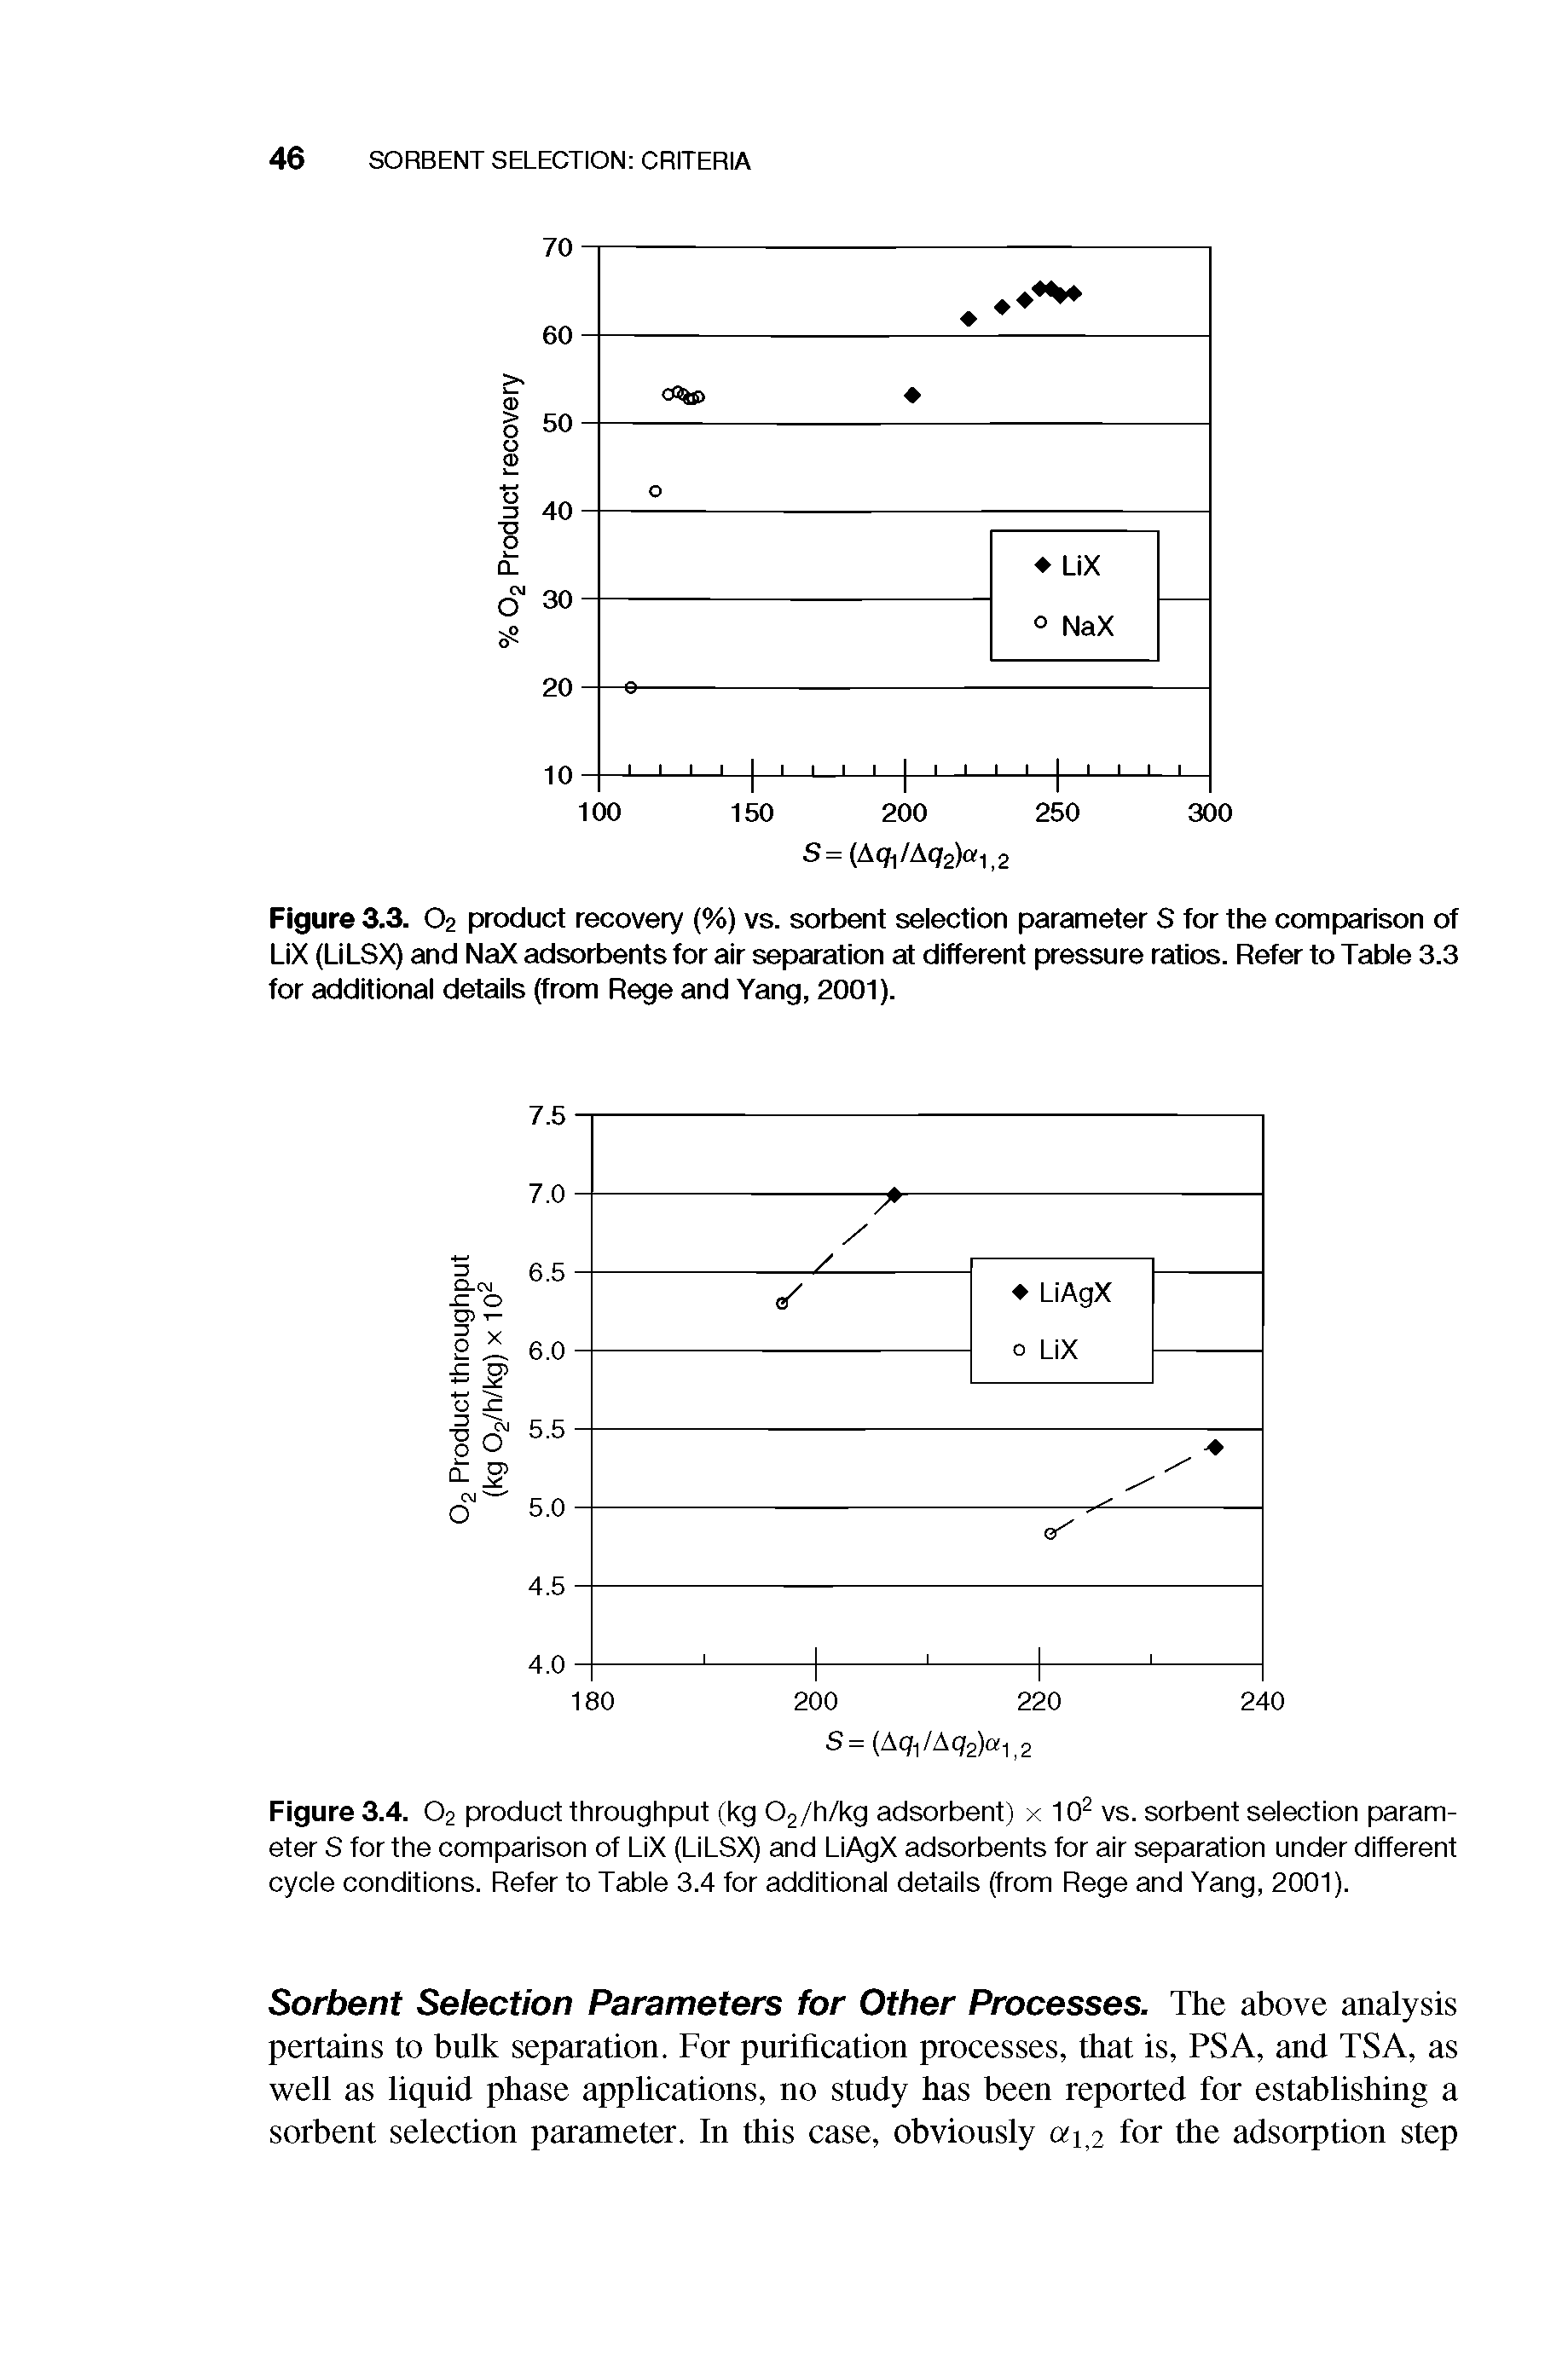 Figure 3.3. O2 product recovery (%) vs. sorbent selection parameter S for the comparison of LiX (LiLSX) and NaX adsorbents for air separation at different pressure ratios. Refer to Table 3.3 for additional details (from Rege and Yang, 2001).